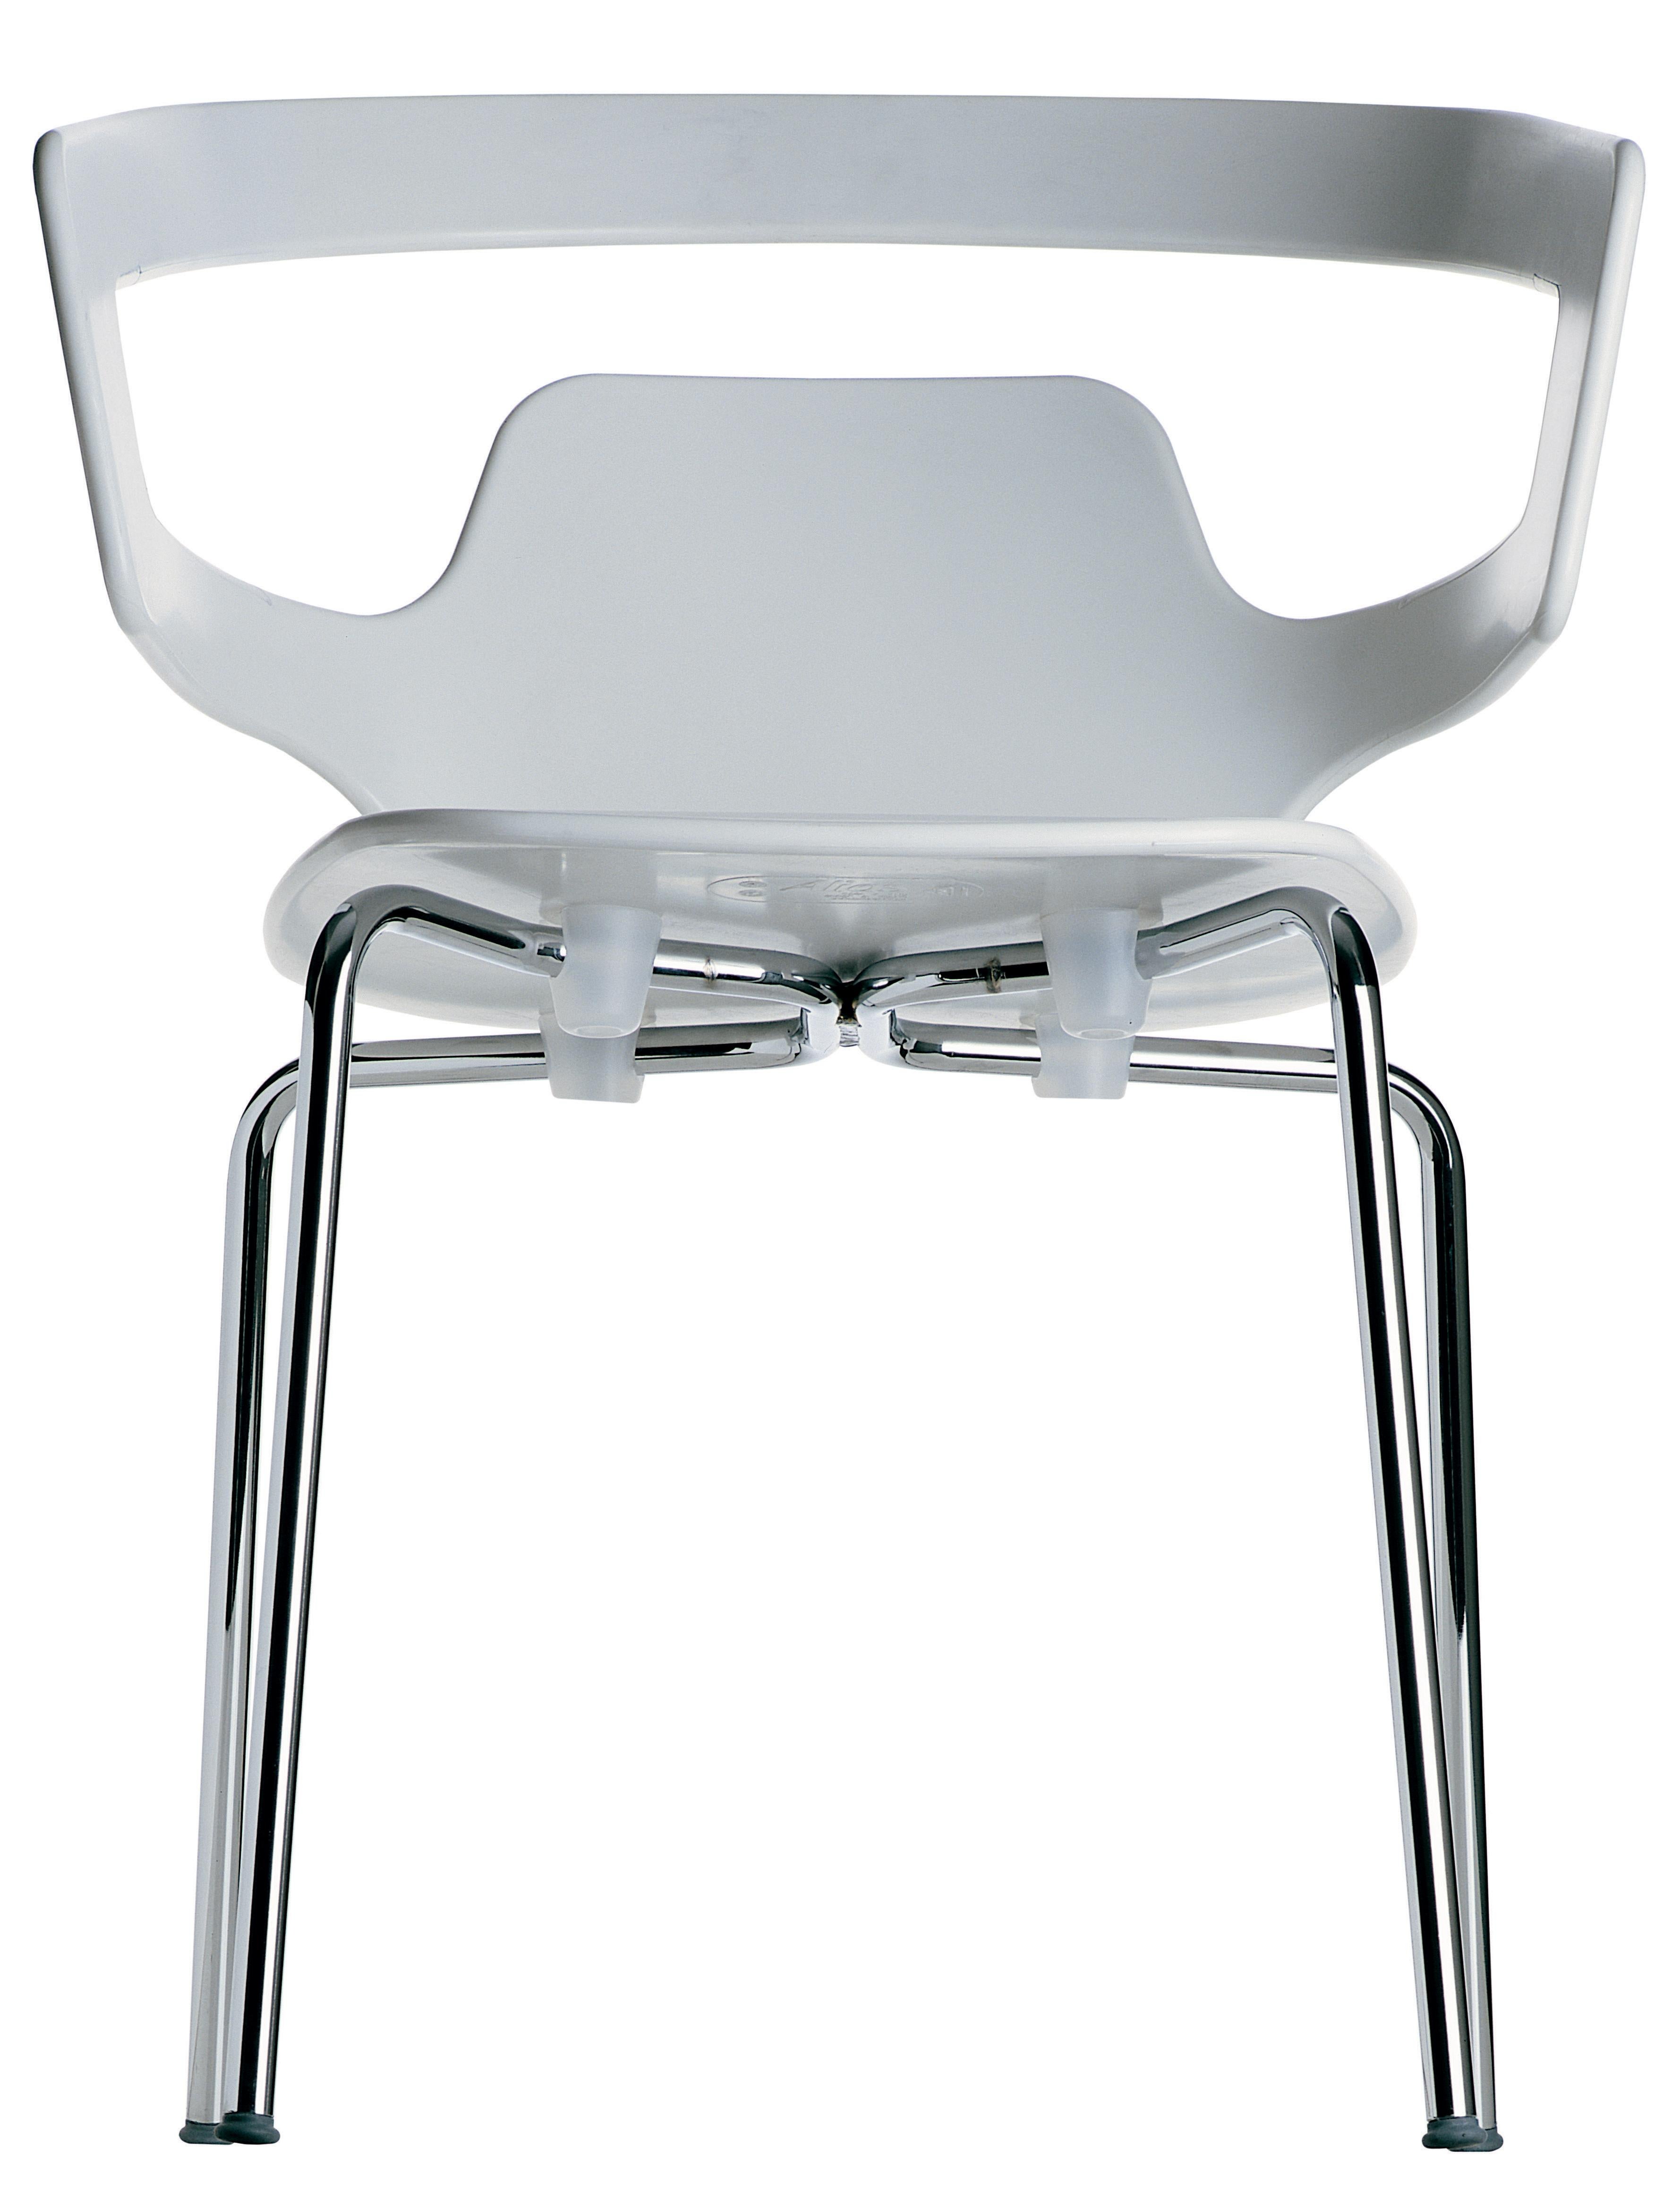 Alias 500 Segesta Chair in White Seat and Chromed Steel Frame by Alfredo Häberli

Stacking chair with arms with structure in lacquered or chromed steel; seat and back in solid plastic material.

Born in Buenos Aires in 1964, he moved to Zurich